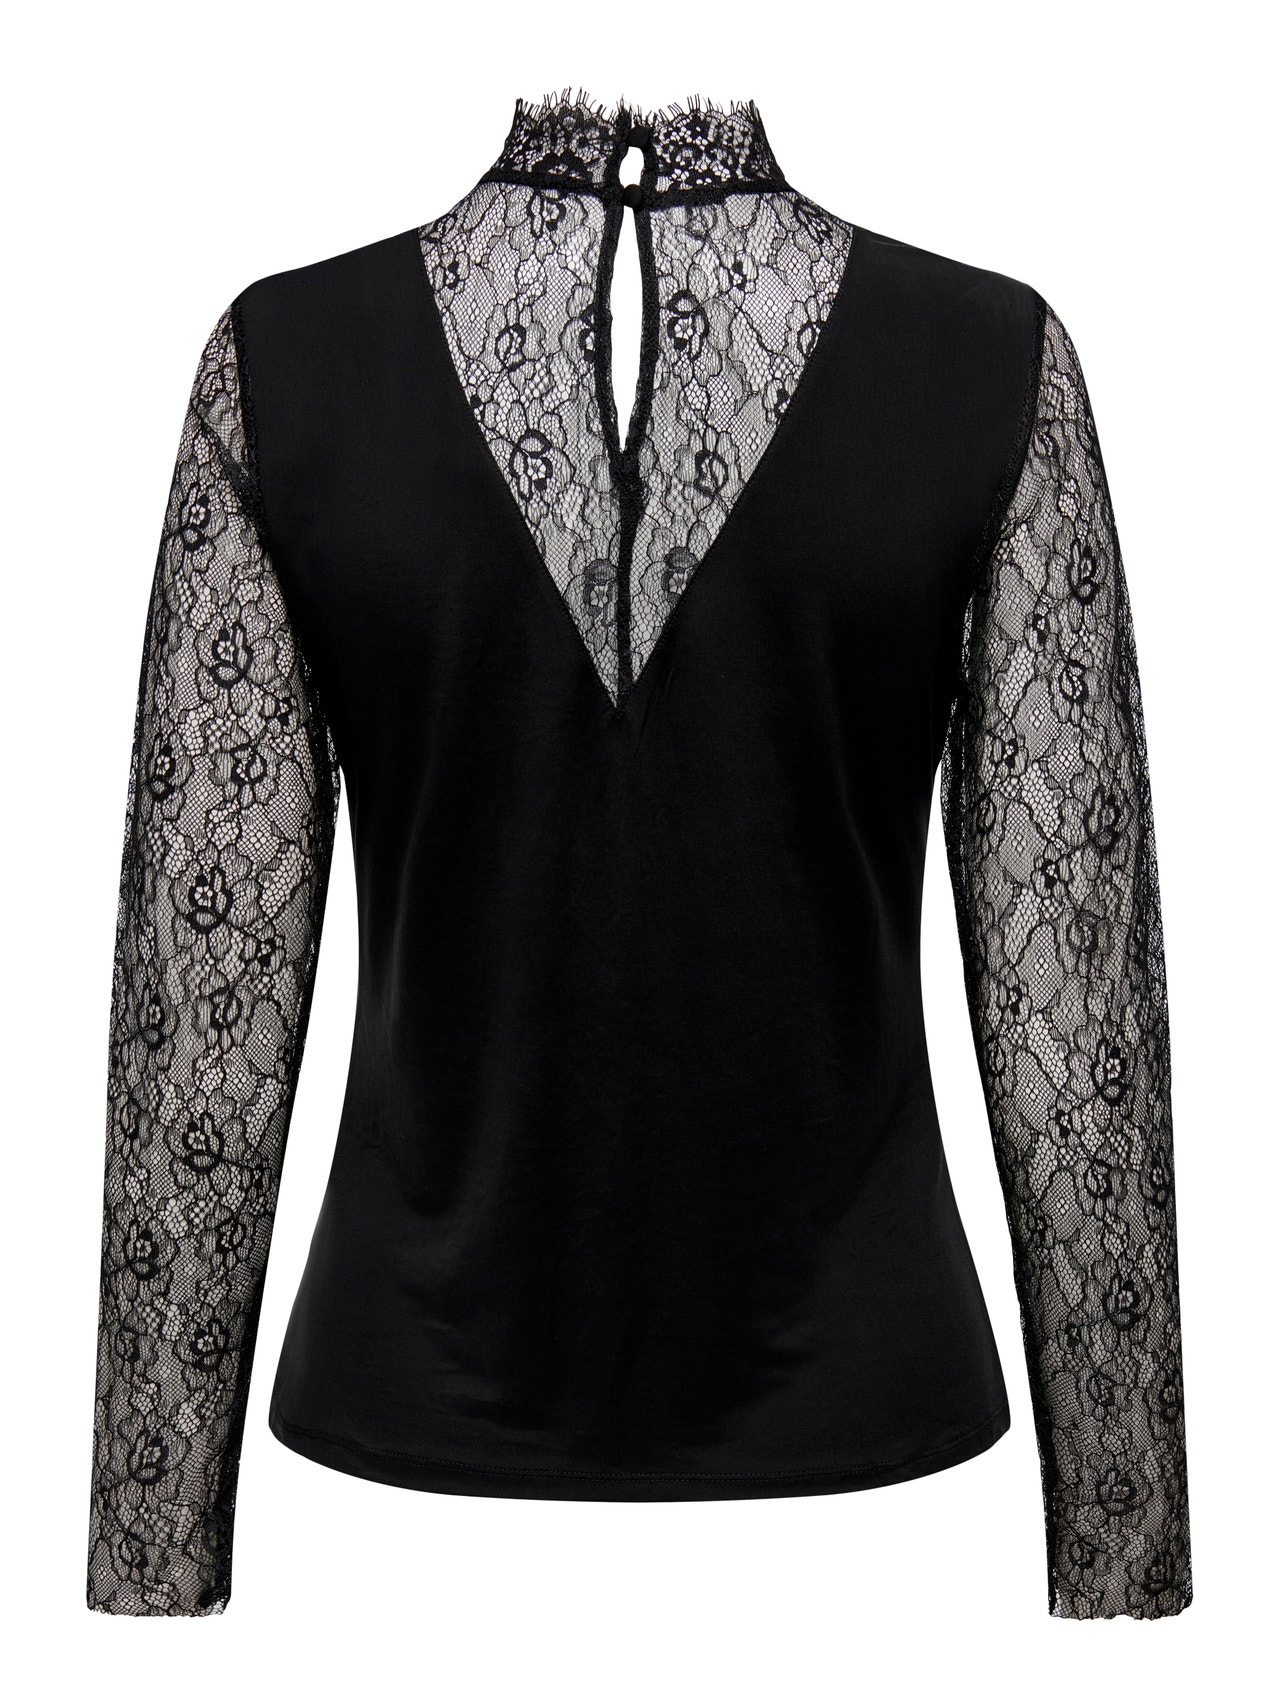 High Neck Lace Top - Black